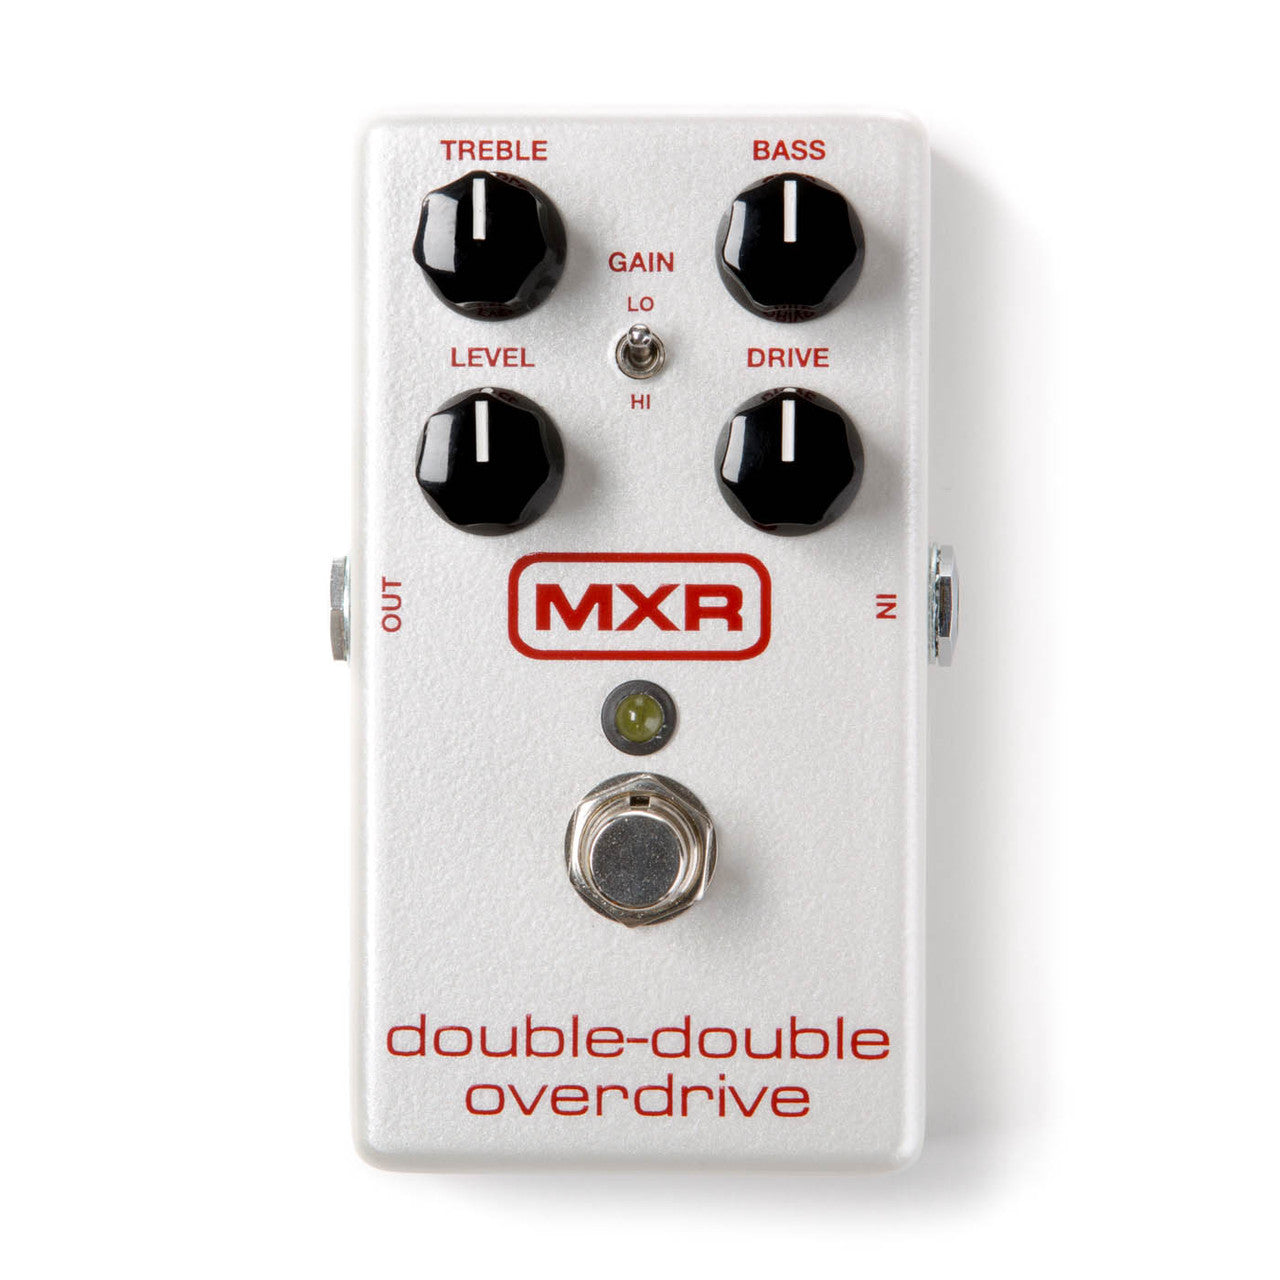 MXR M250 Double-Double Overdrive Effects Pedal